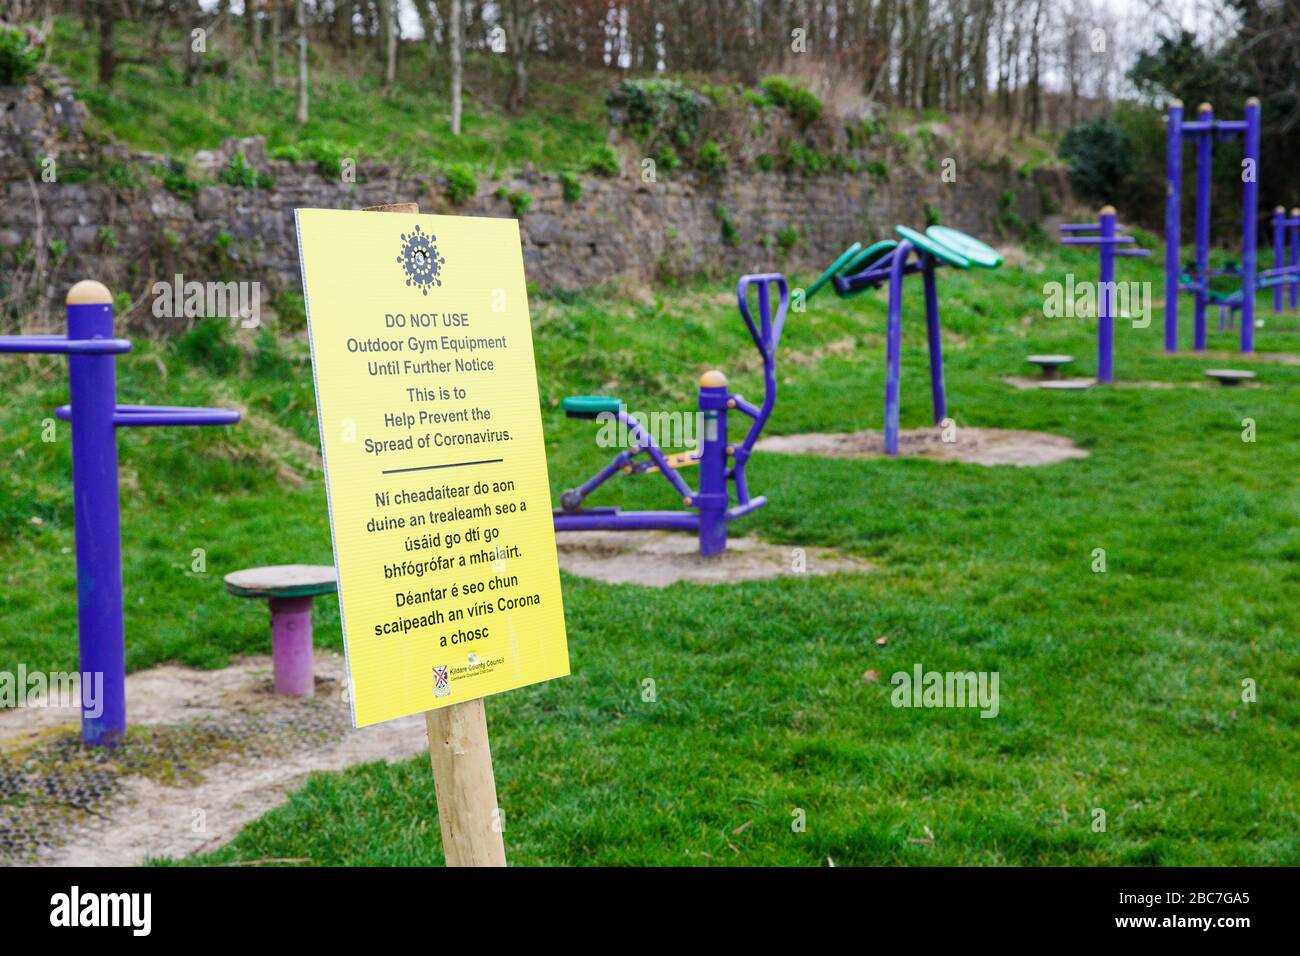 Warning sign prohibiting use of the outdoor fitness equipment to help prevent spread of Covid-19 (coronavirus). Maynooth, Kildare, Ireland Stock Photo